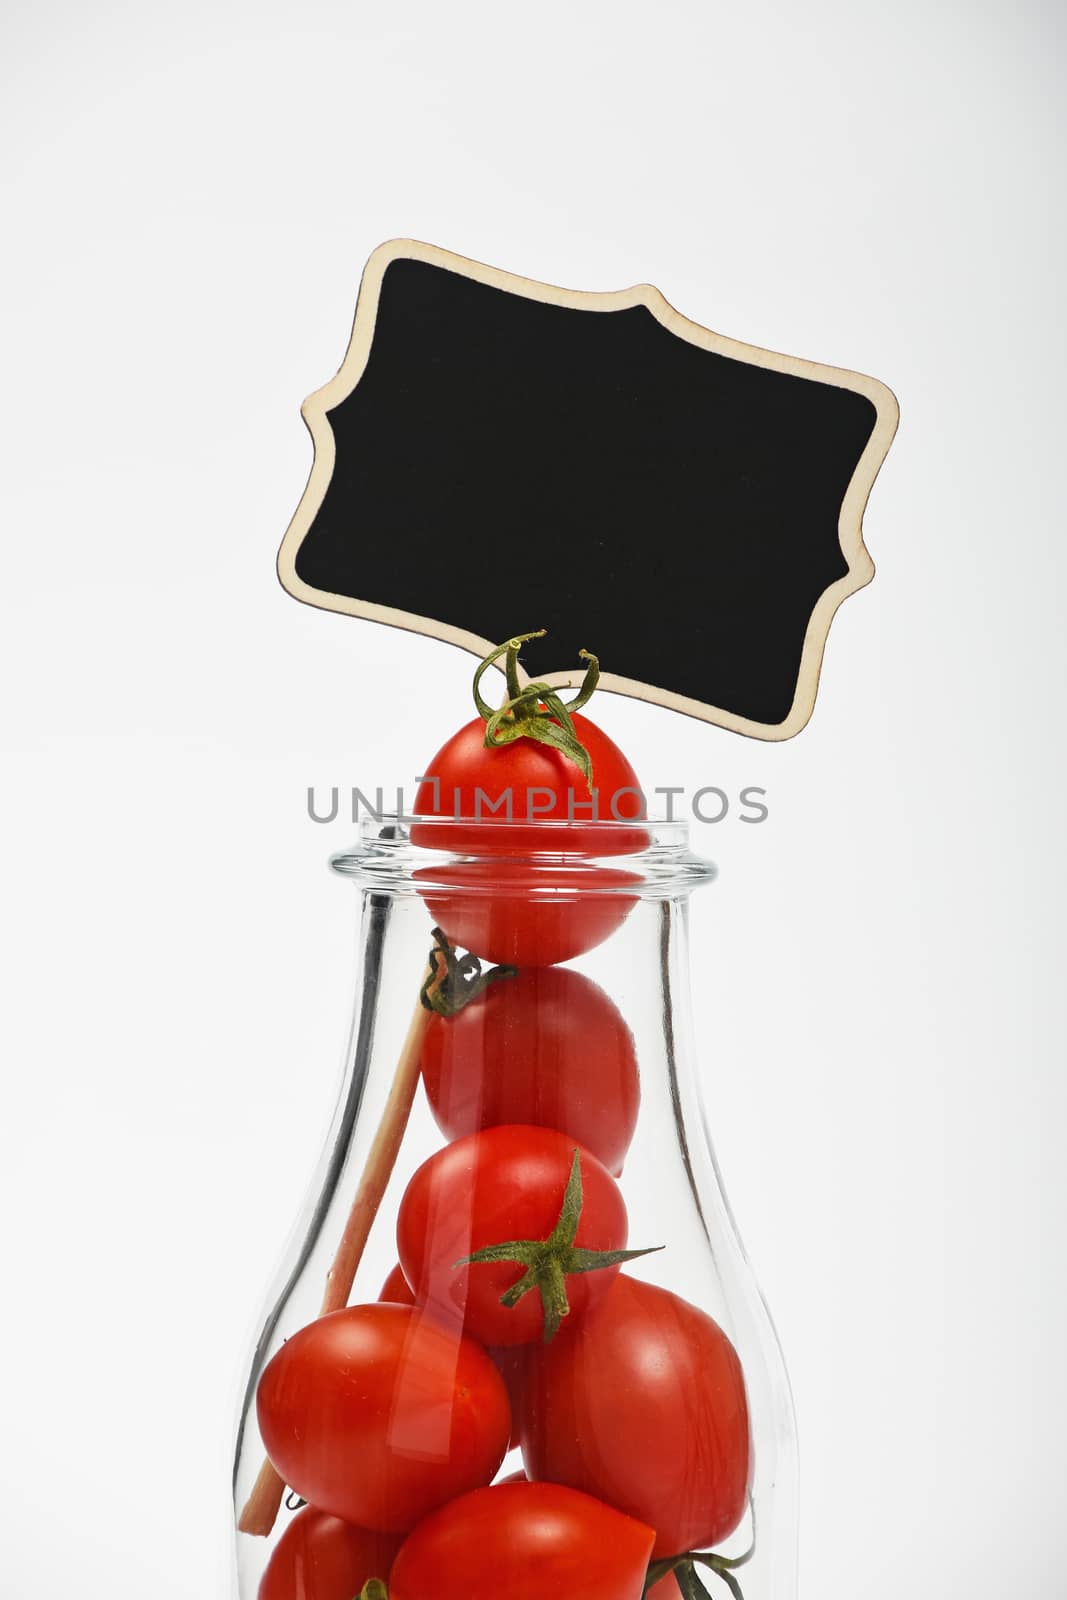 Big glass bottle full of cherry tomatoes and black chalkboard sign over white background as symbol of fresh natural organic juice or ketchup, close up crop